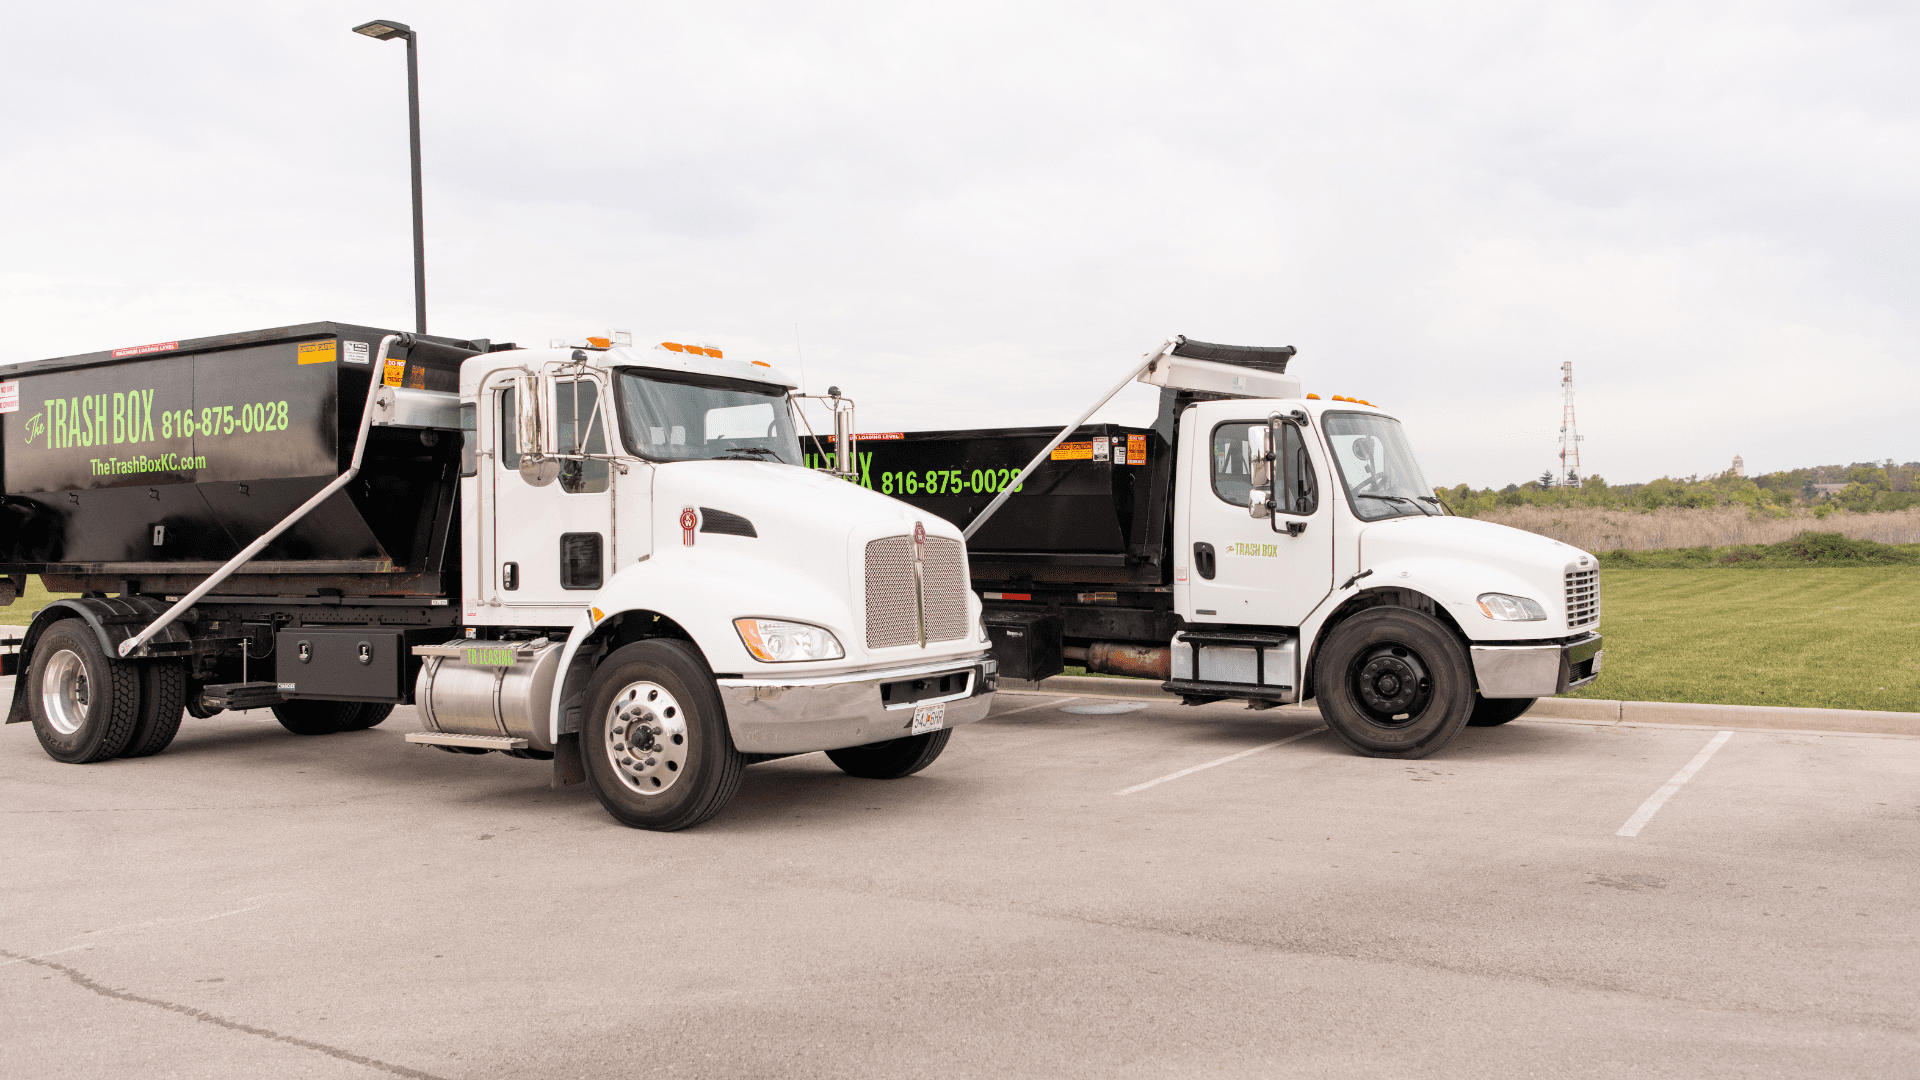 Need Best Dumpster Rental Services in Kansas City MO?